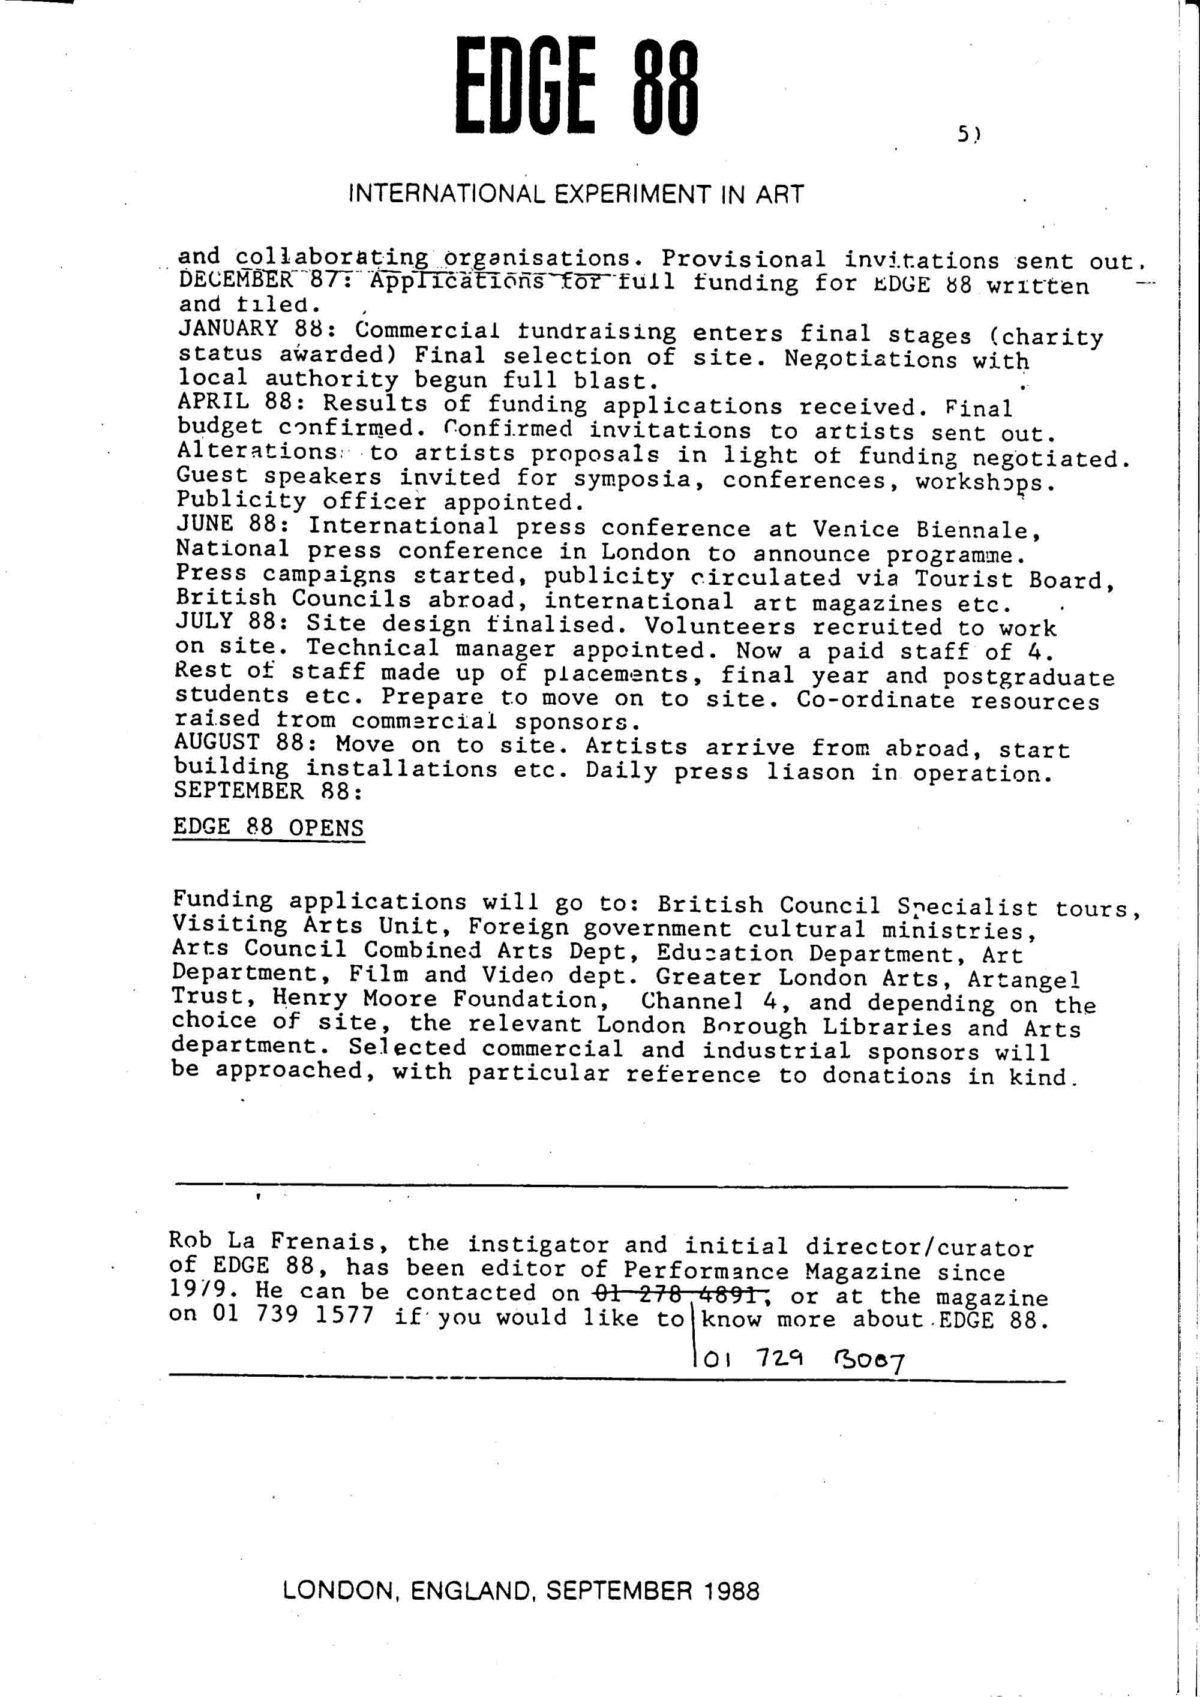 Rationale, 1988 (Page 5 of 5)